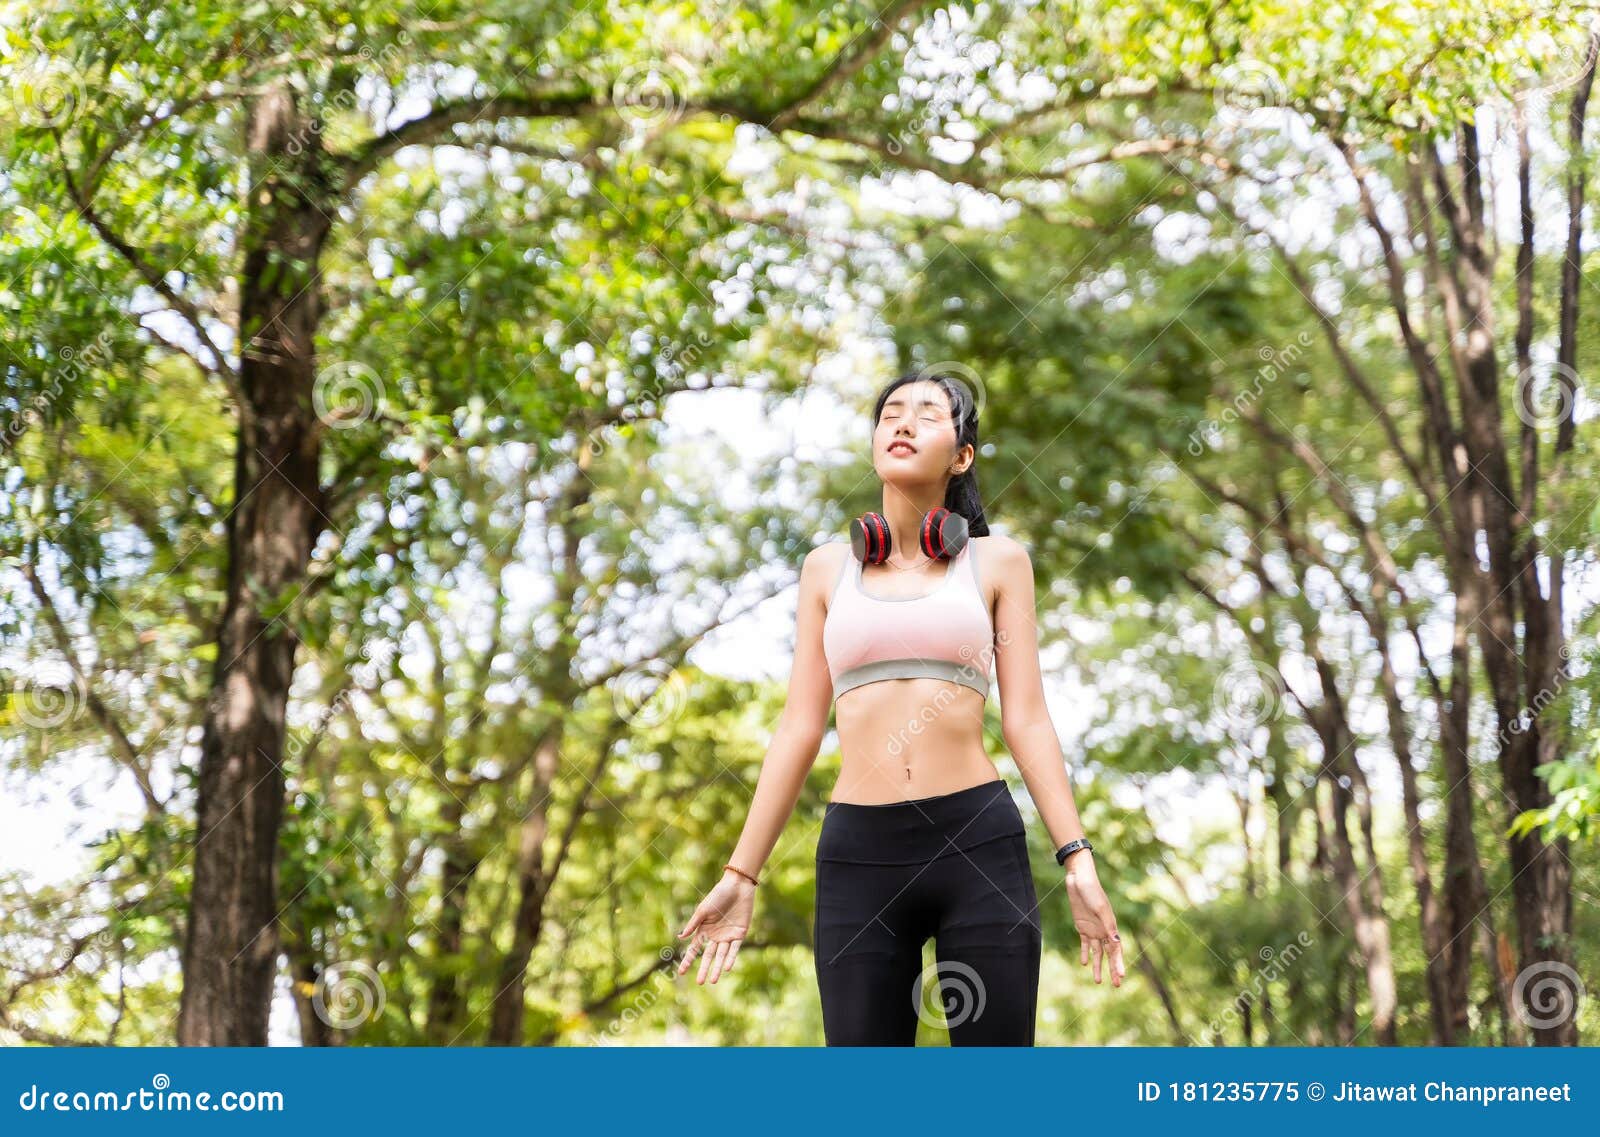 Healthy Woman are Inhaling Fresh Air during Exercise in a Happy and ...